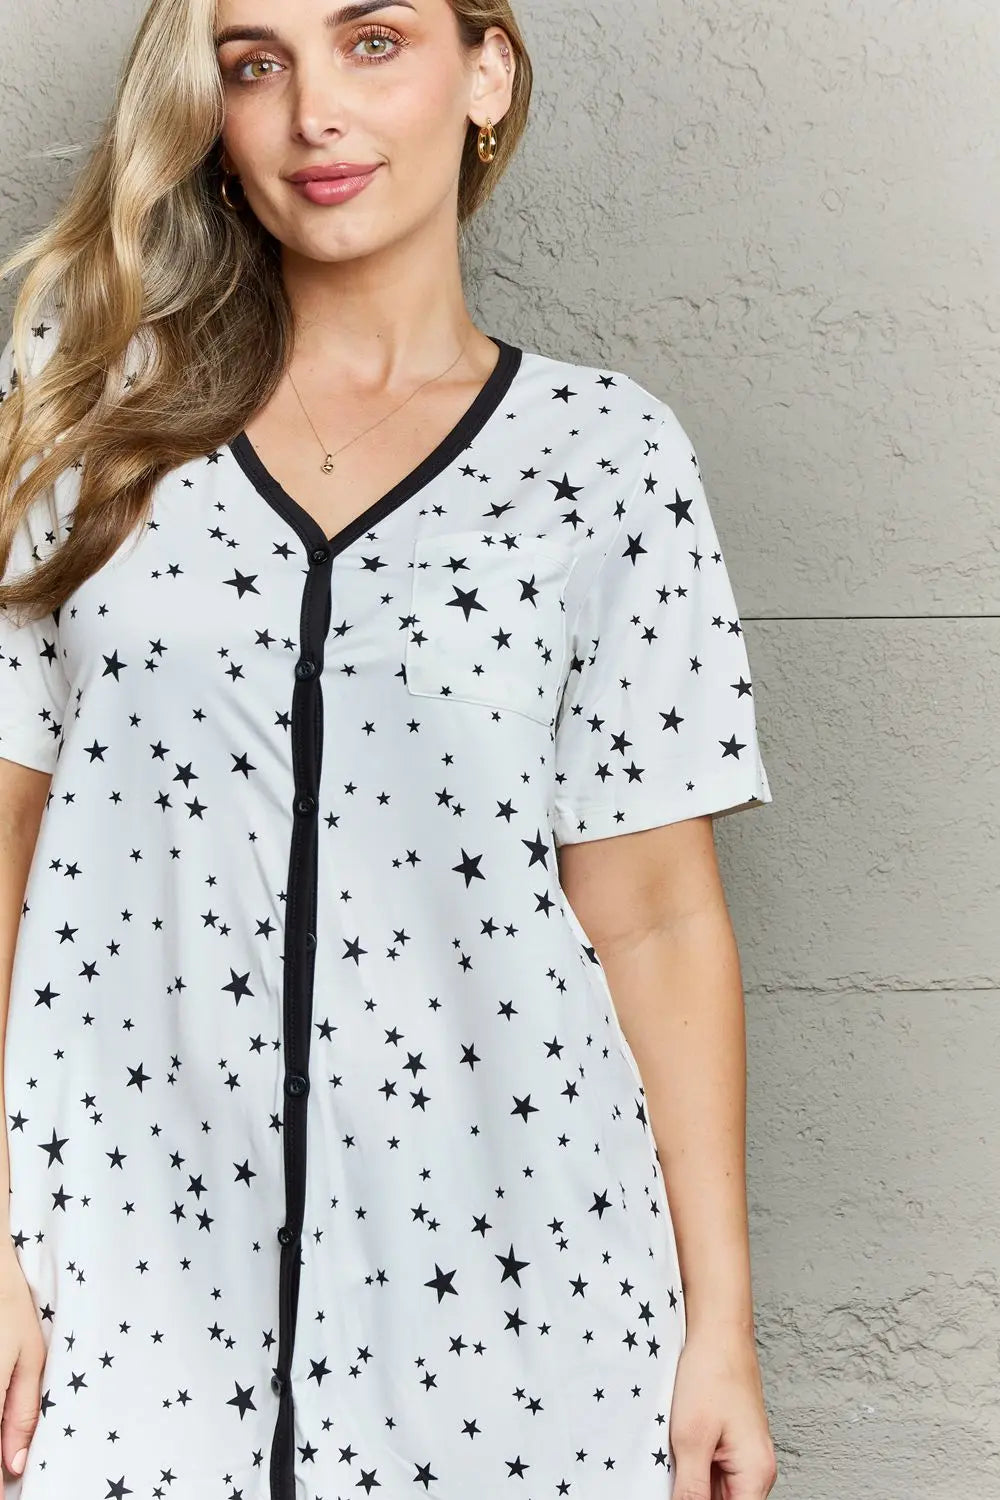 MOON NITE Quilted Quivers Button Down Sleepwear Dress Trendsi